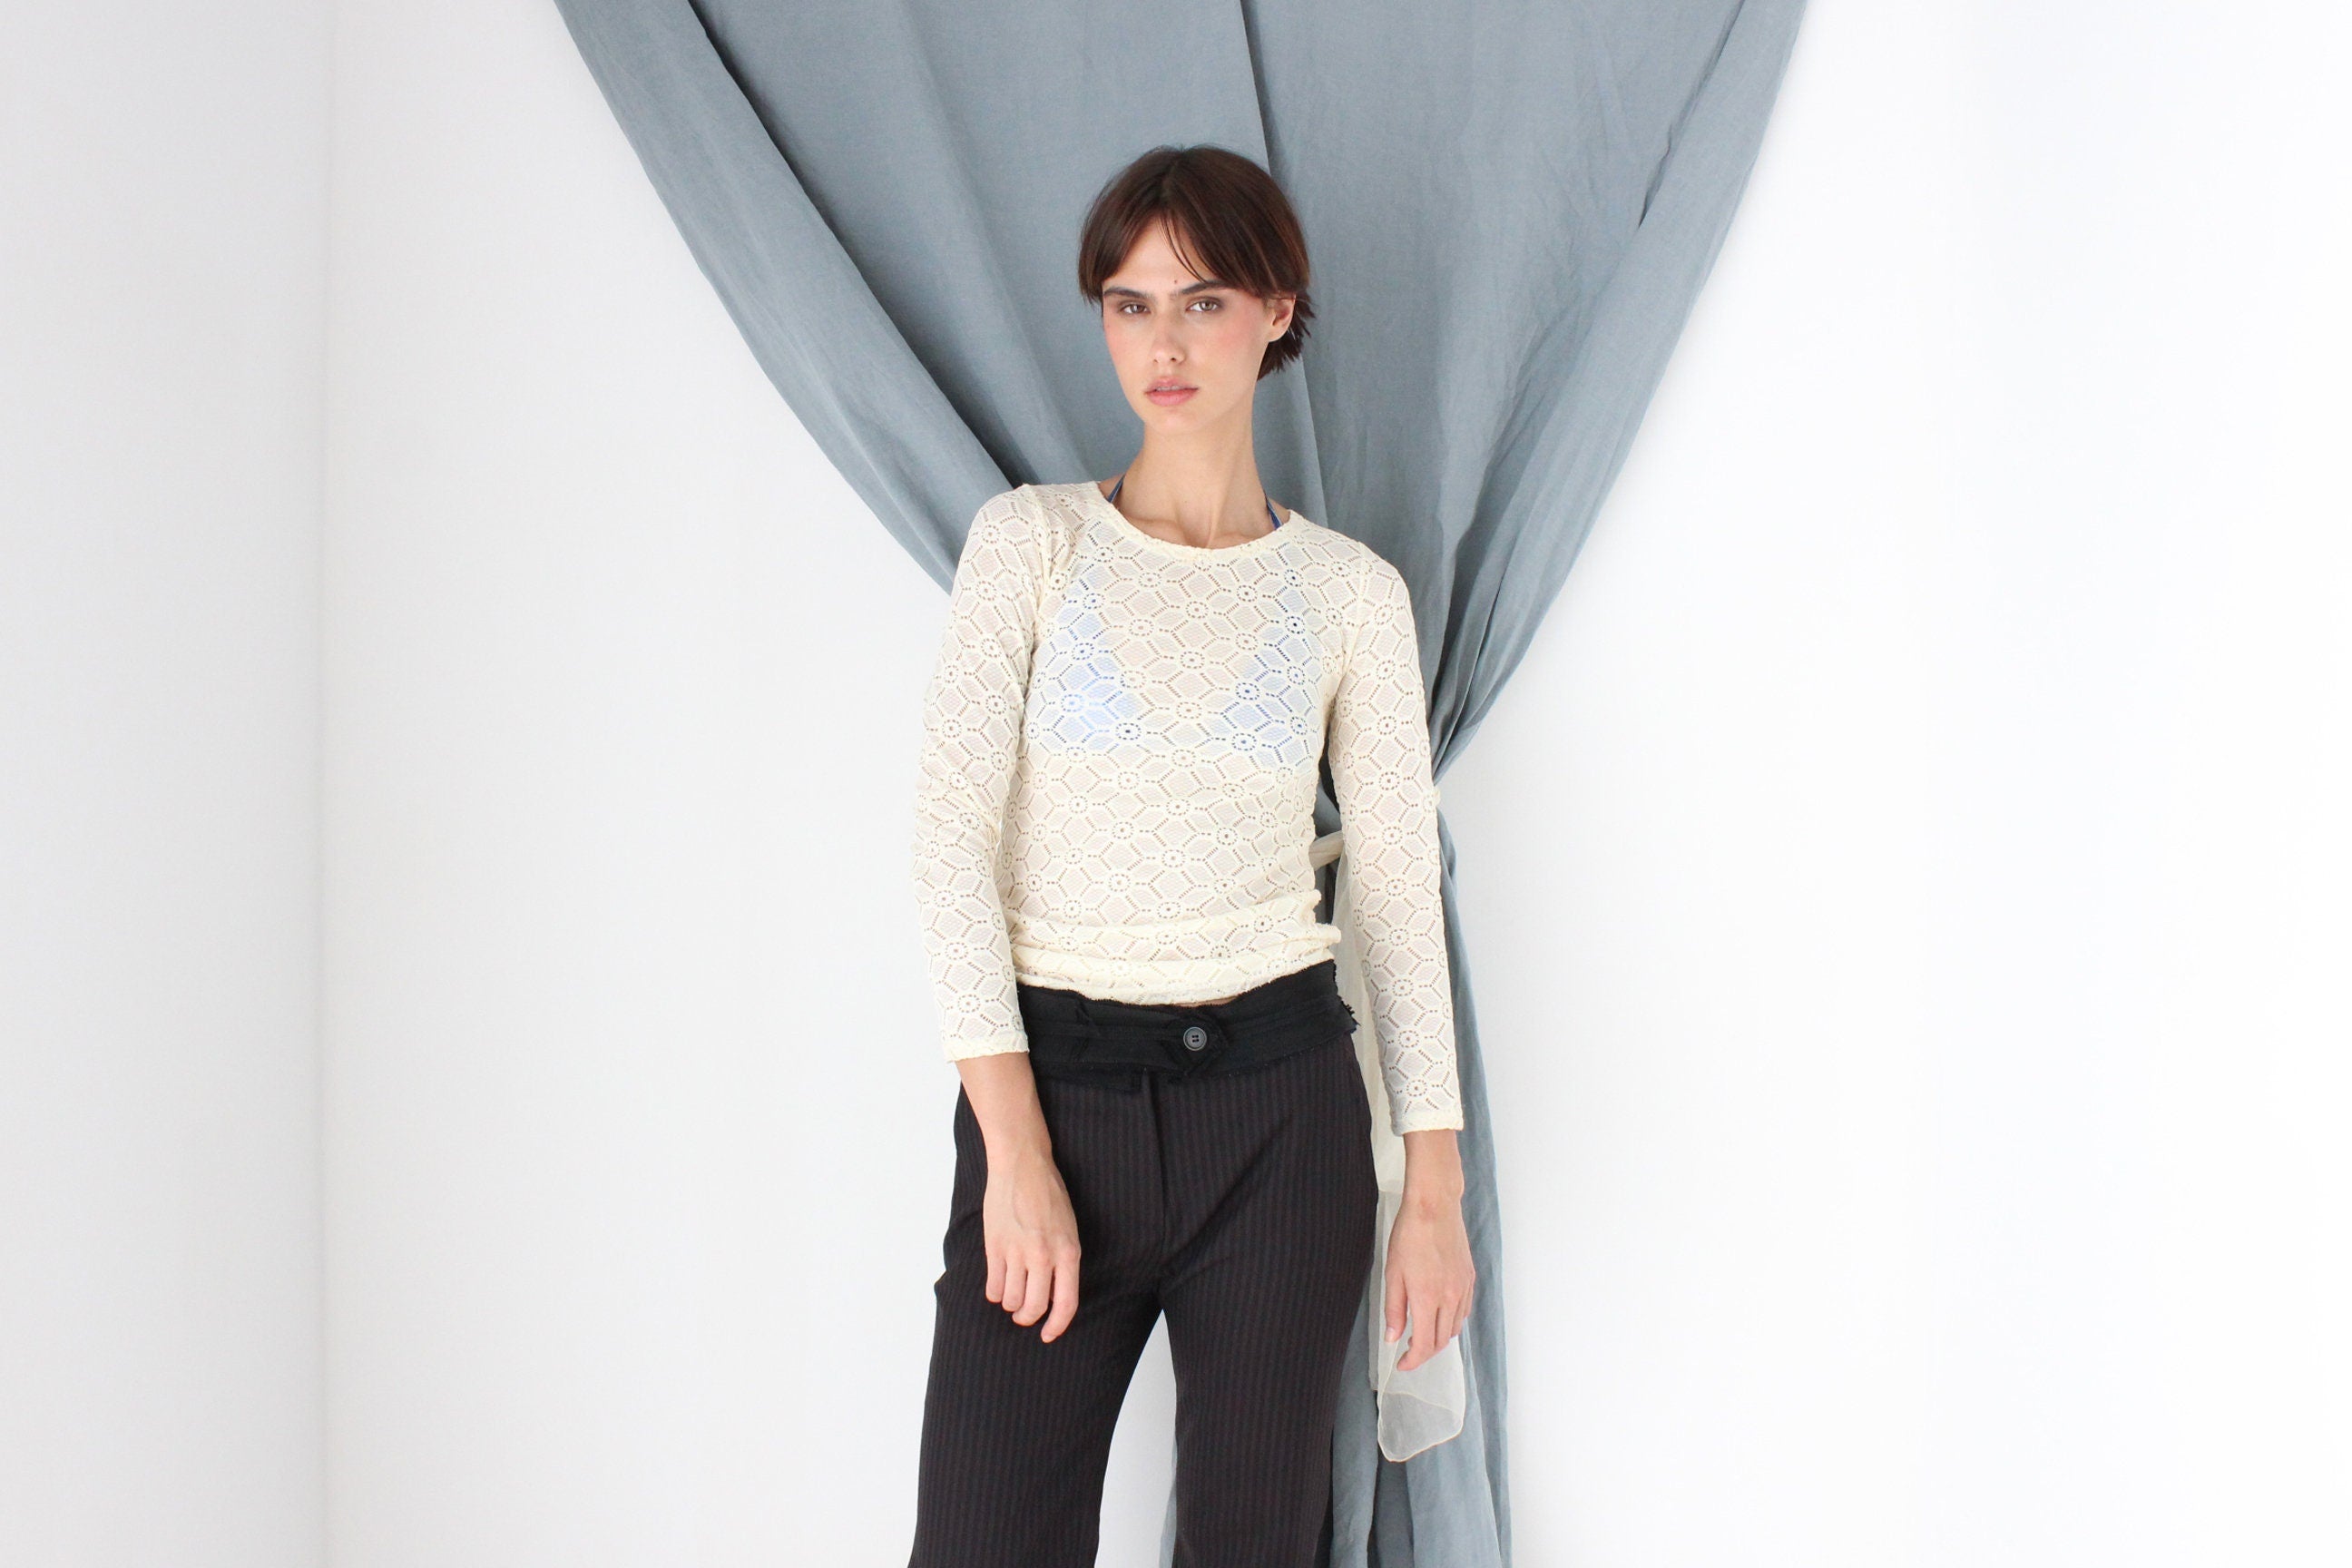 MADE IN ITALY 2000s Crochet / Lace Long Sleeve Top